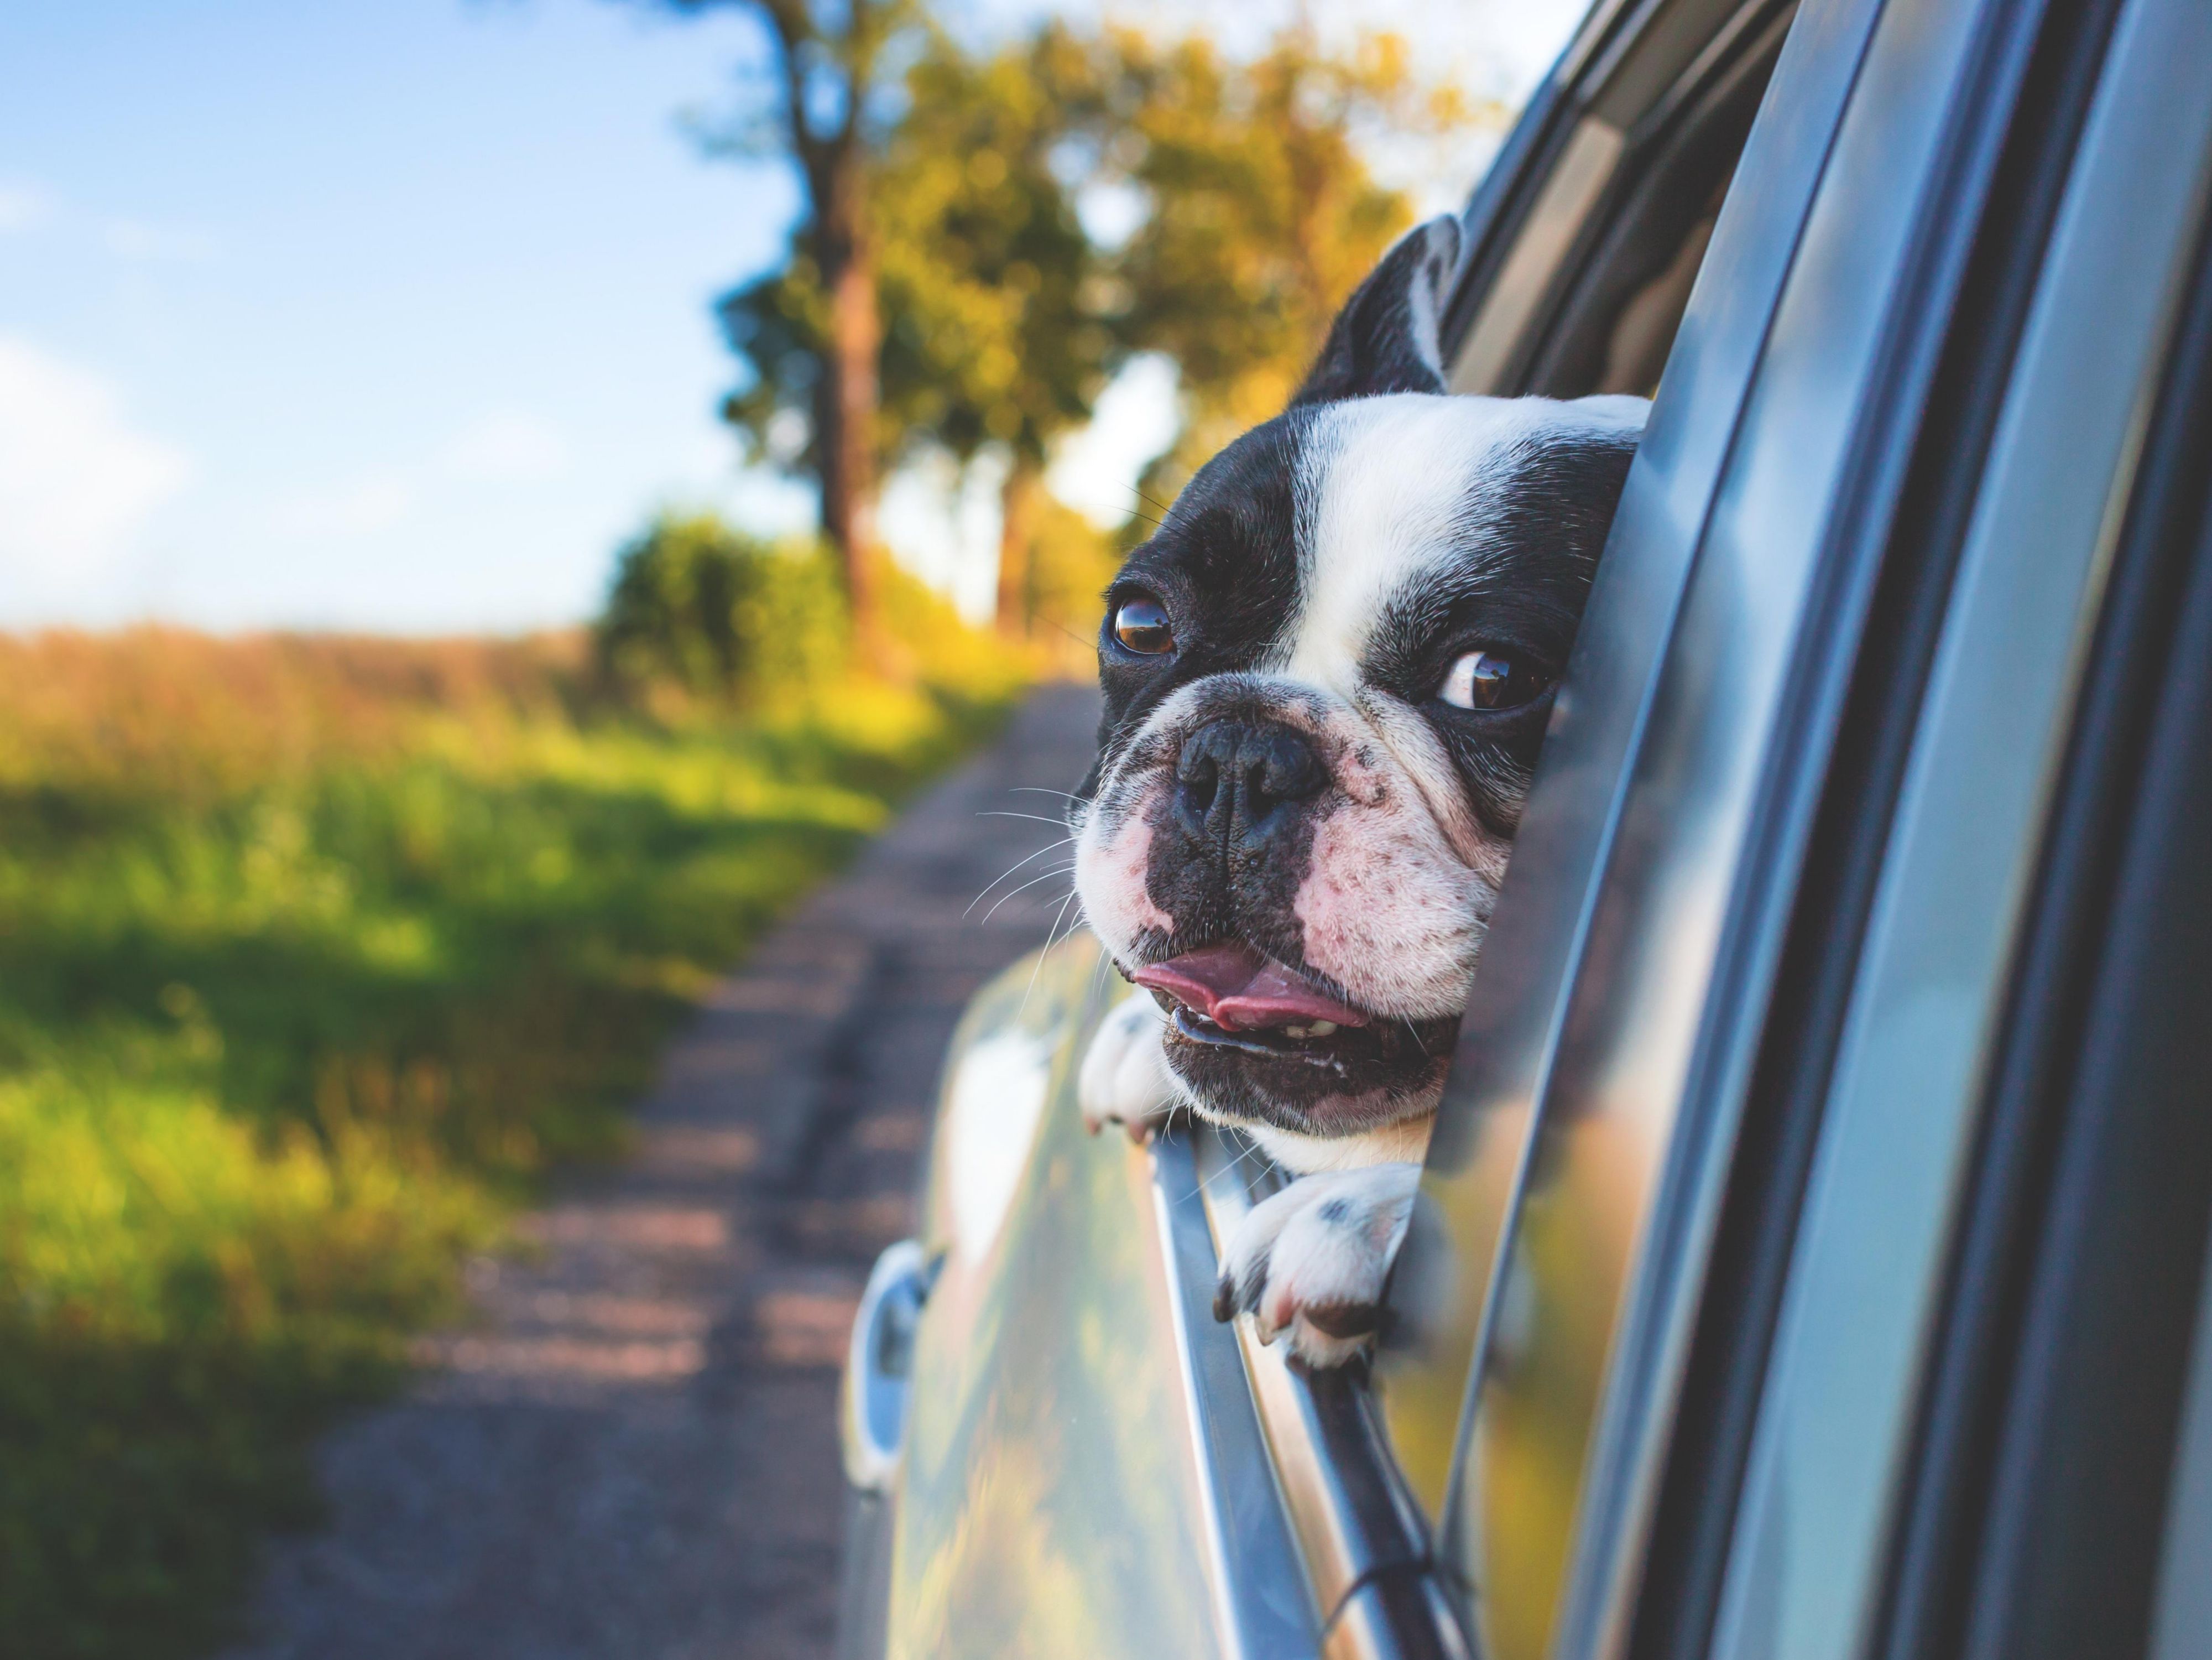 At Holiday Inn Lethbridge, we're pet-friendly! Your furry family members are always welcome, and we have fantastic walking paths nearby for their enjoyment. A pet fee of $25 per stay applies. Come and stay with your four-legged companion.